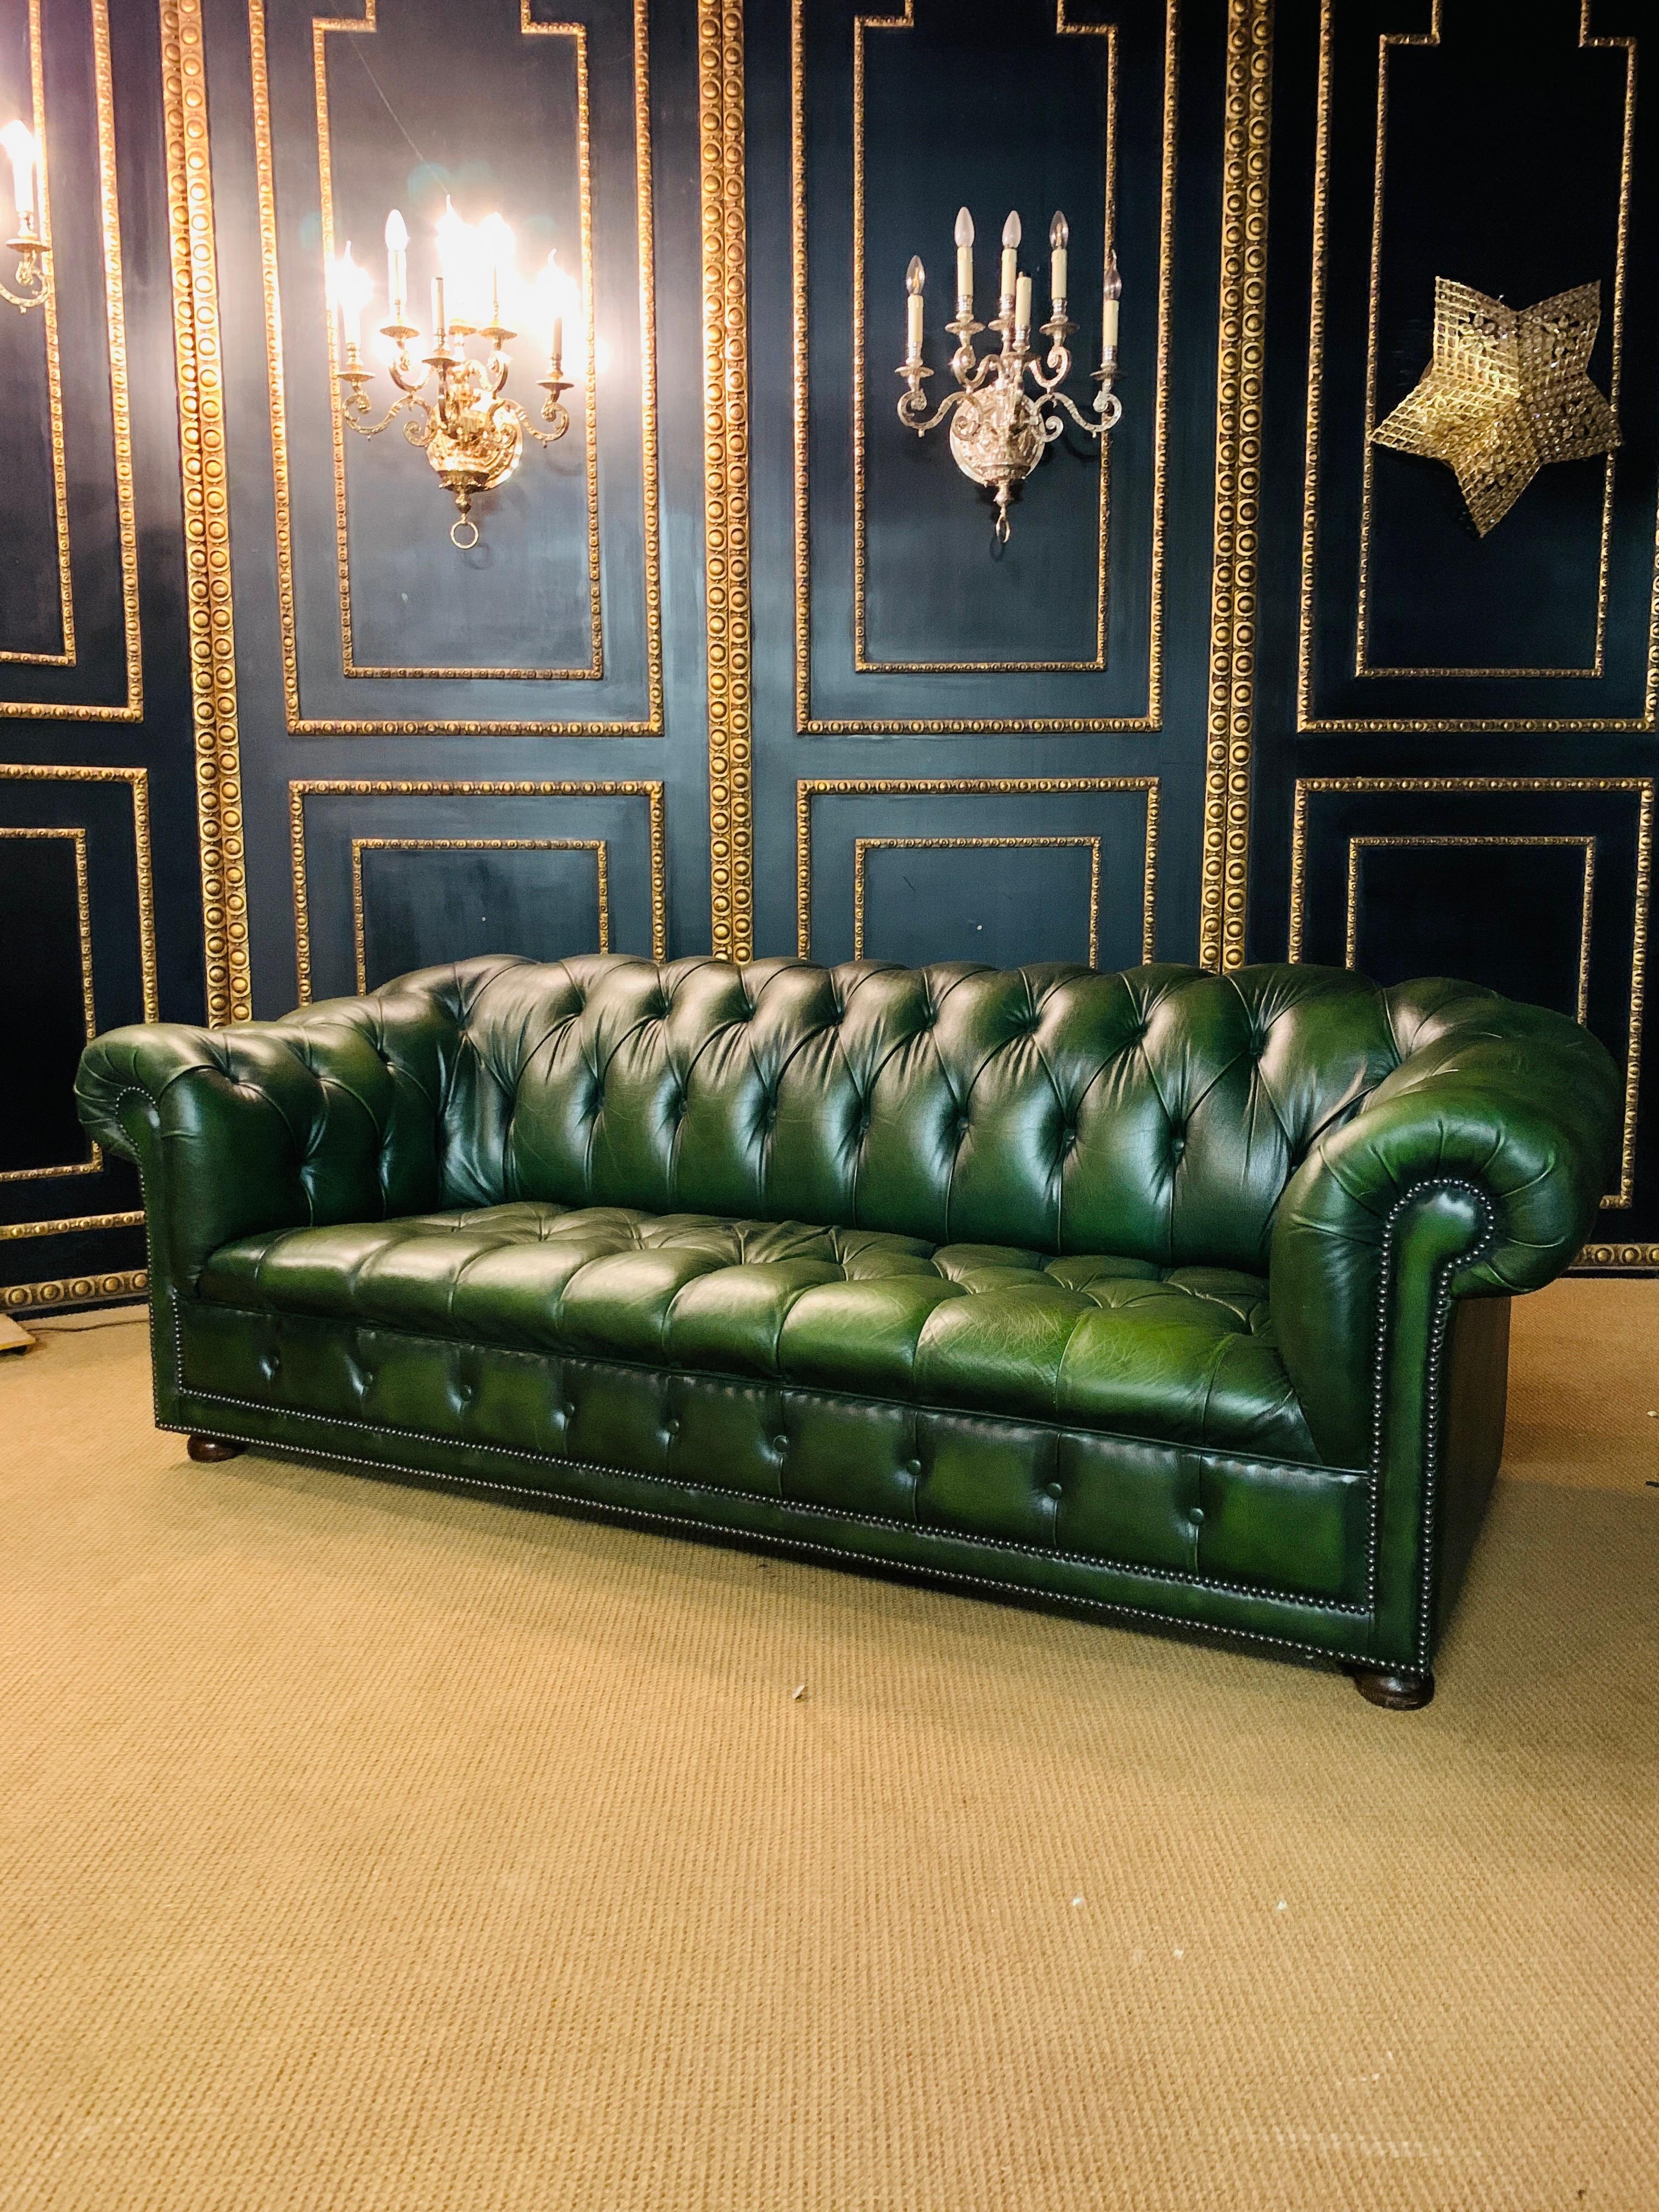 20th Century Original Green Chesterfield Sofa from the 80's